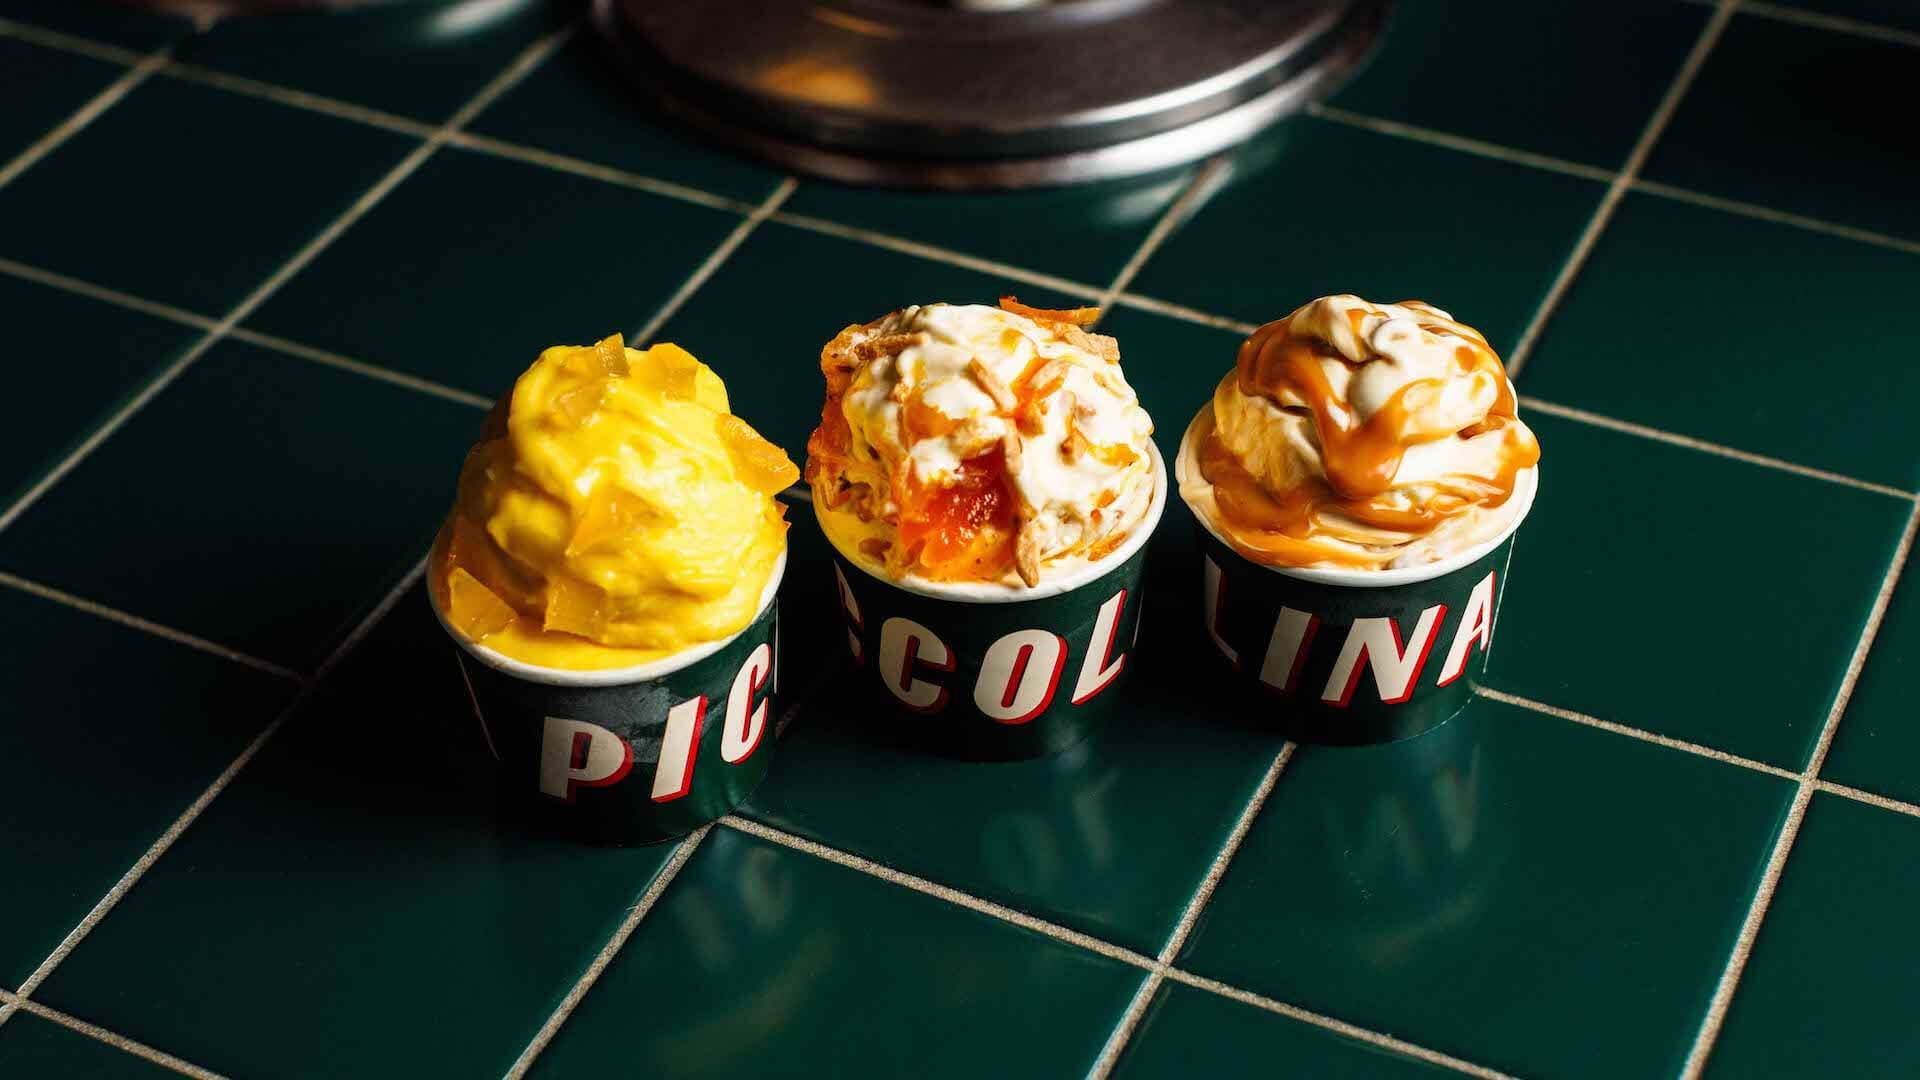 Lagoon Dining and Piccolina Gelato collaboration for Lunar New Year